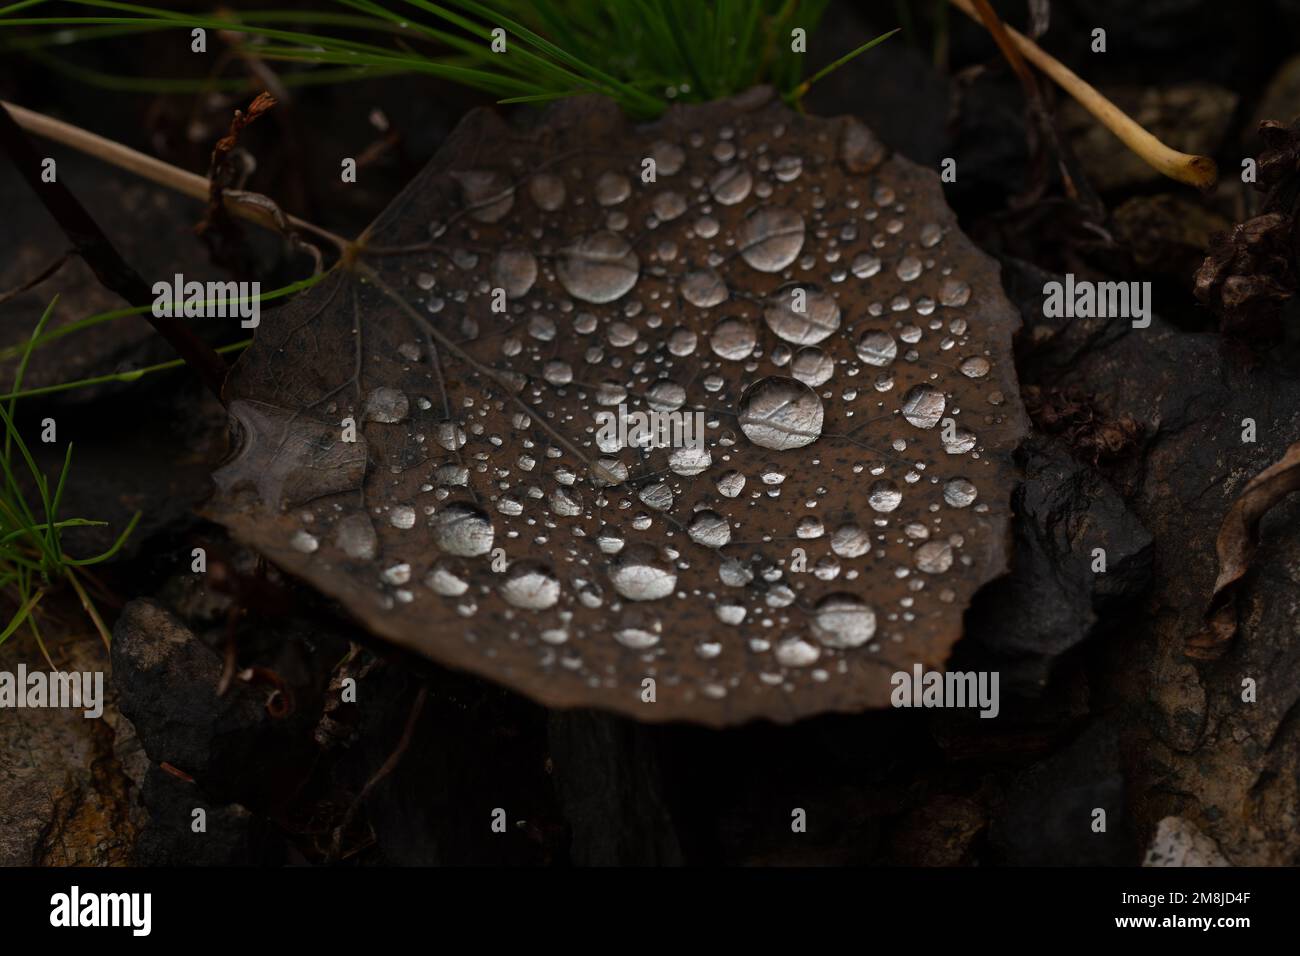 A closeup shot of a fallen leaf with water drops on it in the forest Stock Photo